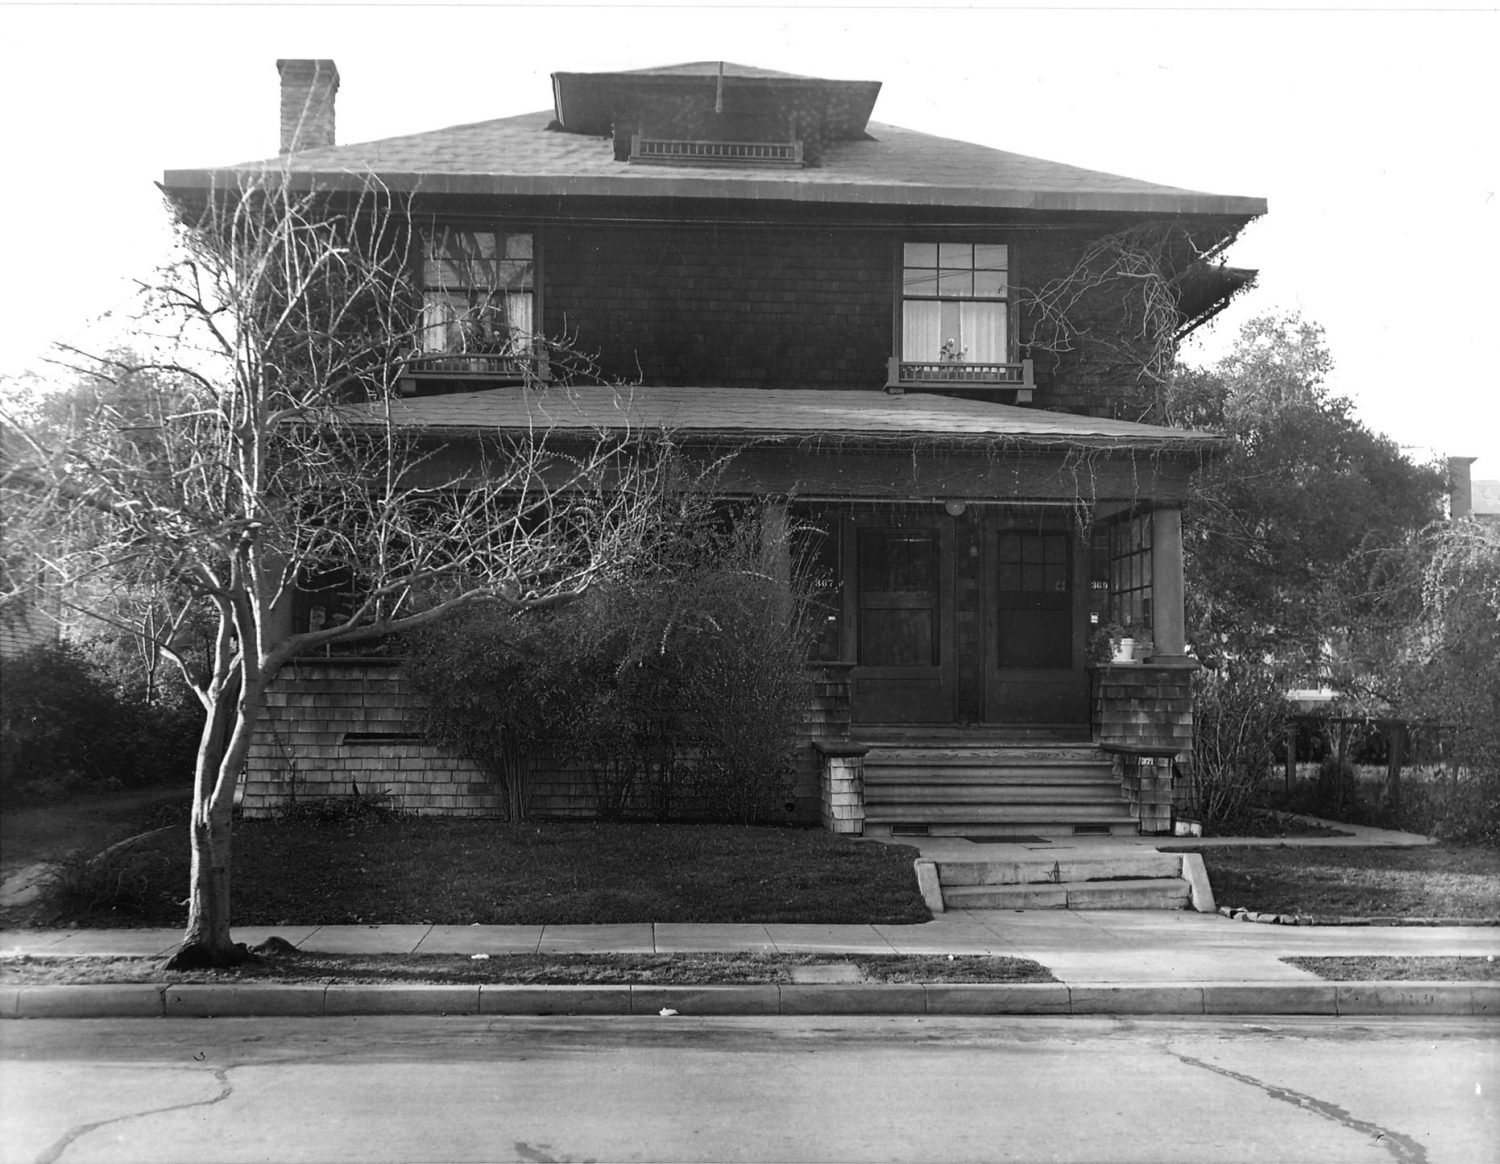 Exterior photo of the house at 367 Addison Avenue that would become the first home for Hewlett-Packard, taken in 1939.